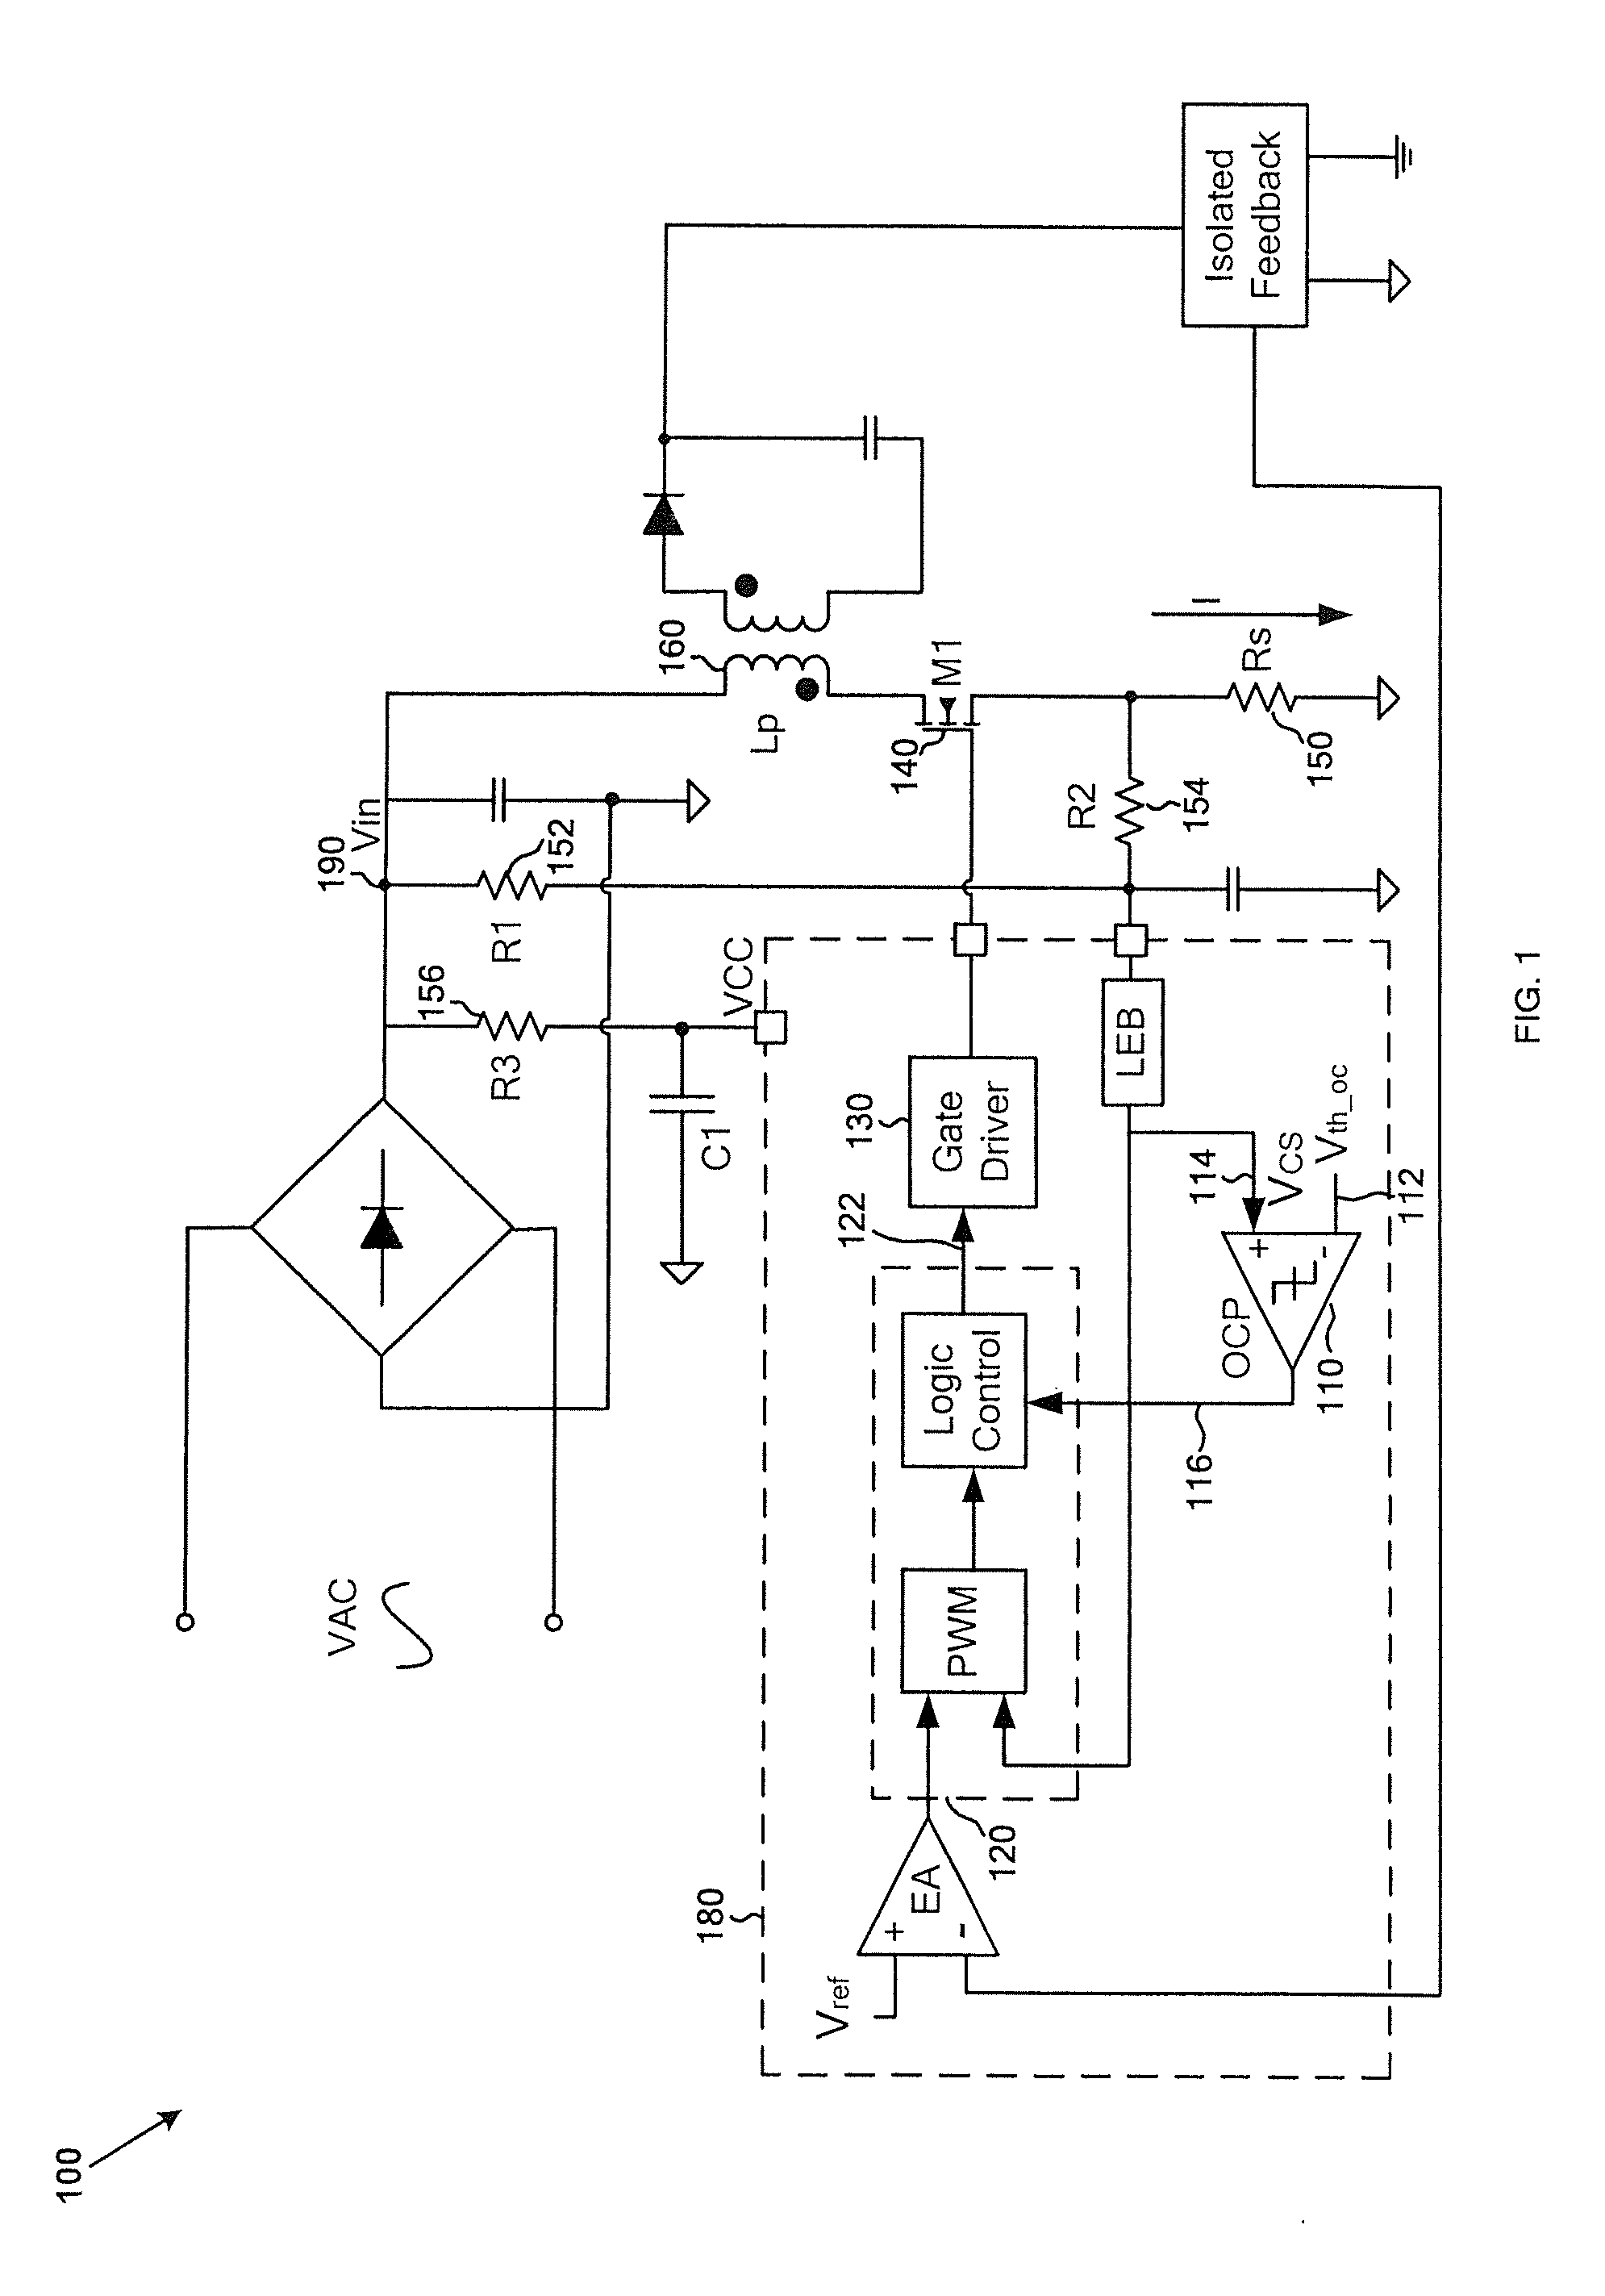 System and method providing over current protection based on duty cycle information for power converter